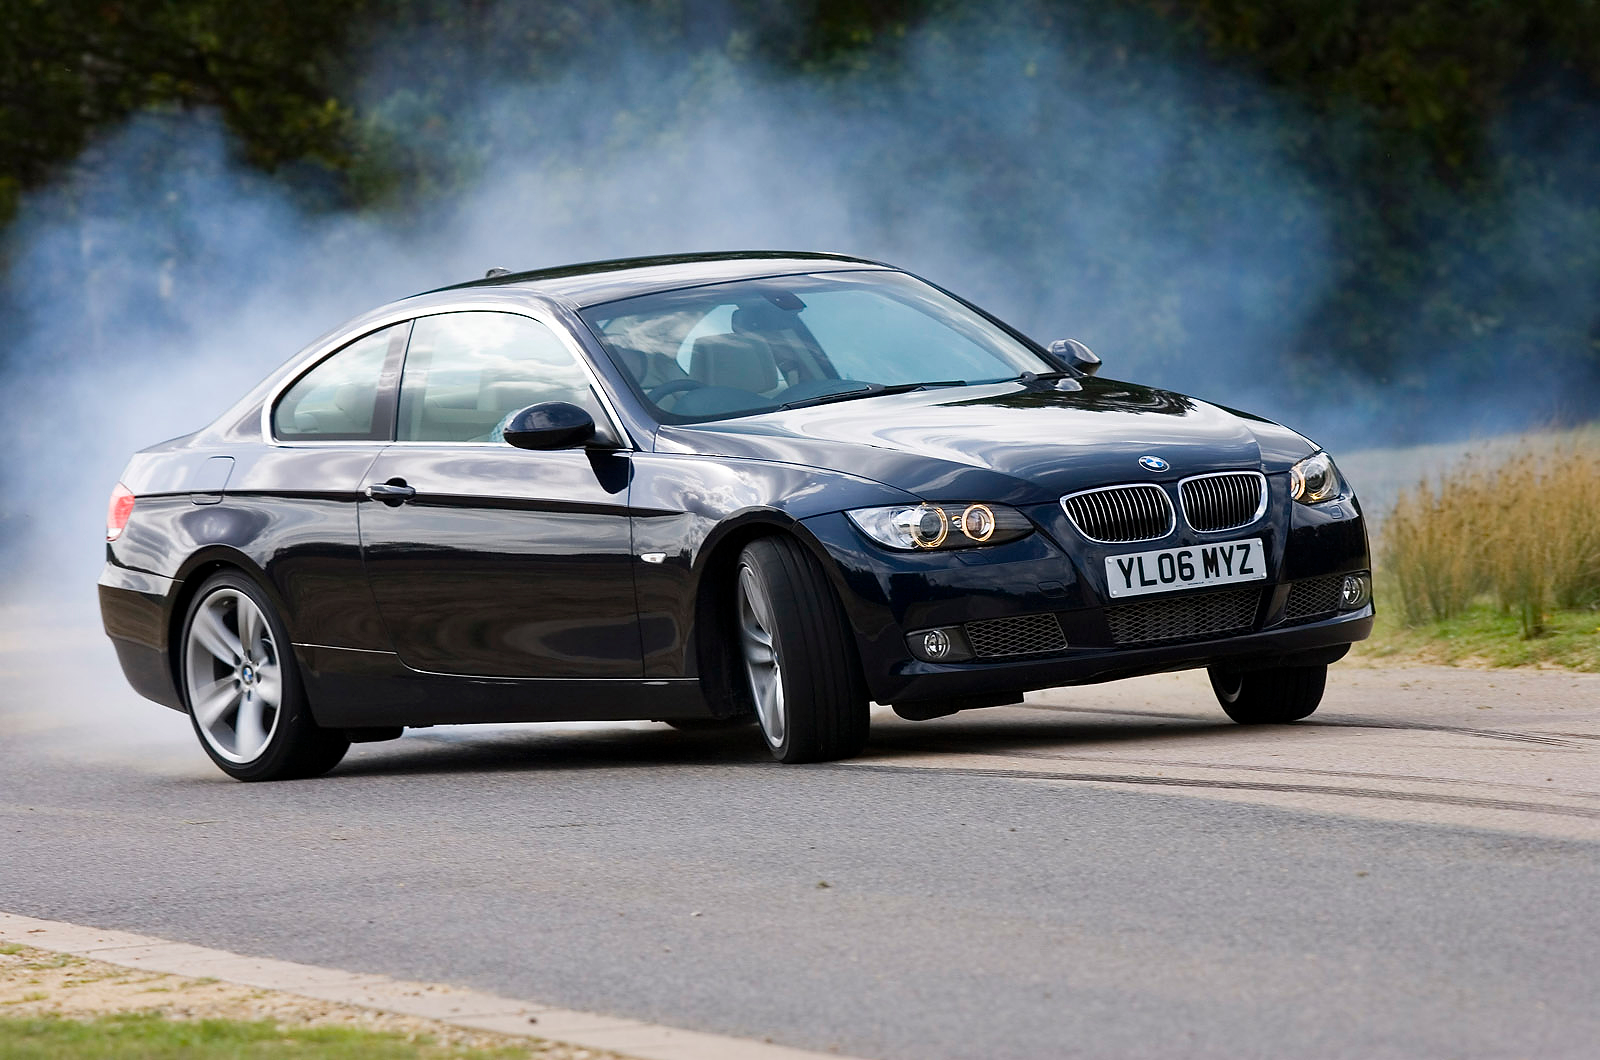 BMW 3 Series 5th Generation (E90) - What To Check Before You Buy